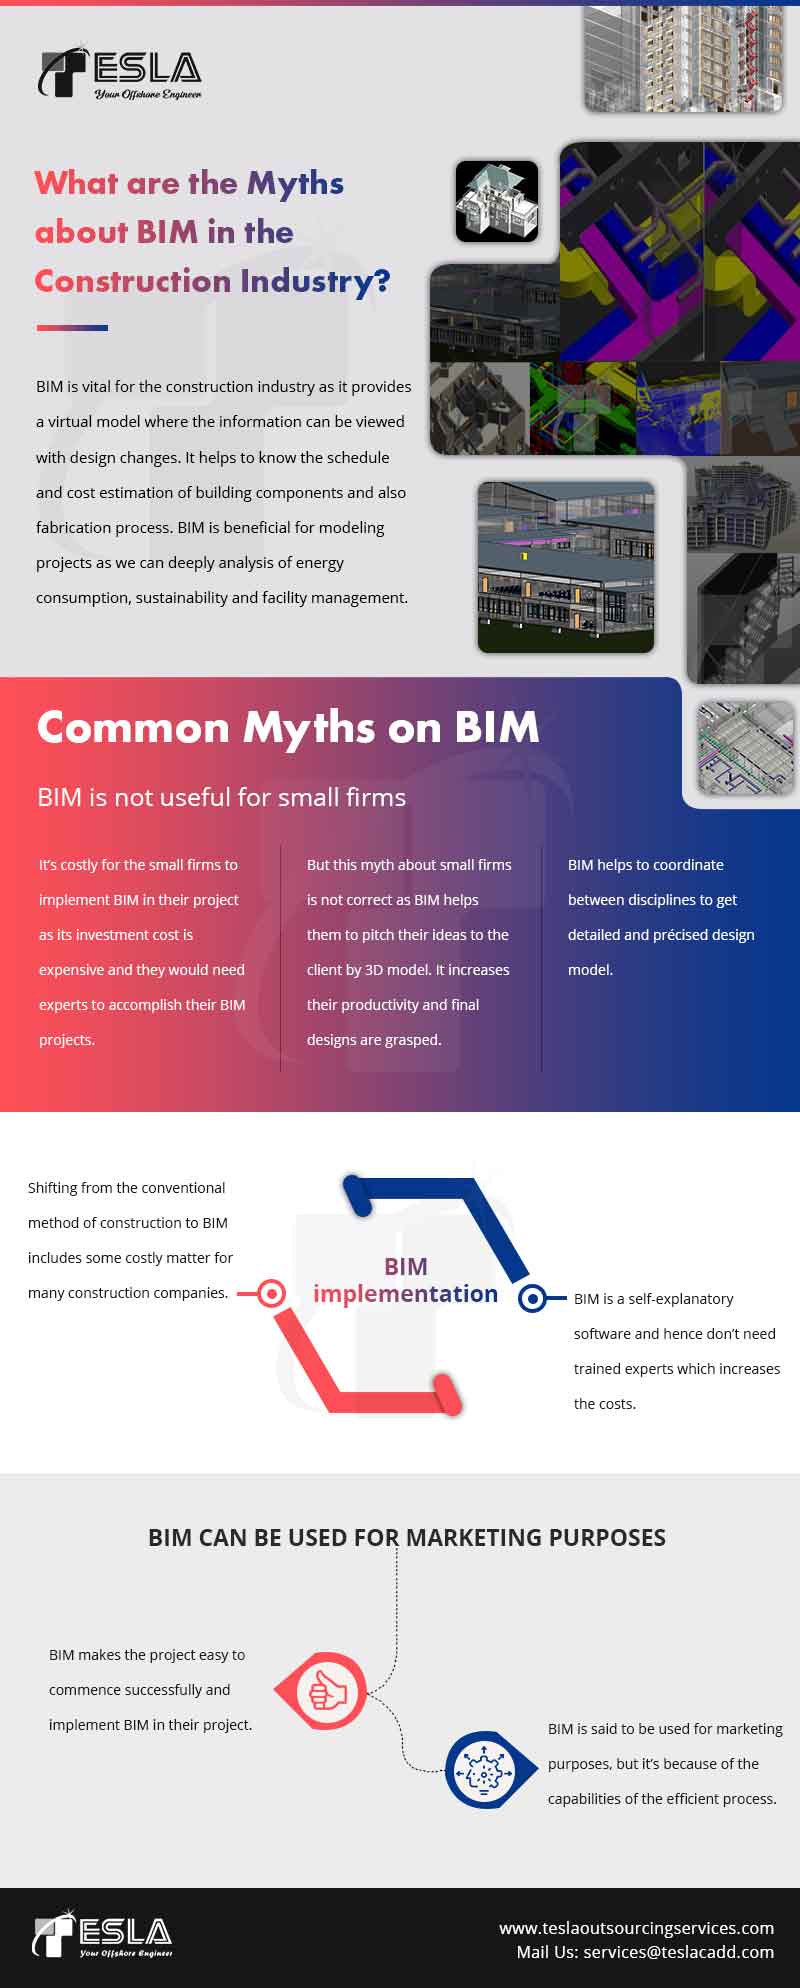 What are the Myths about BIM in the Construction Industry?
